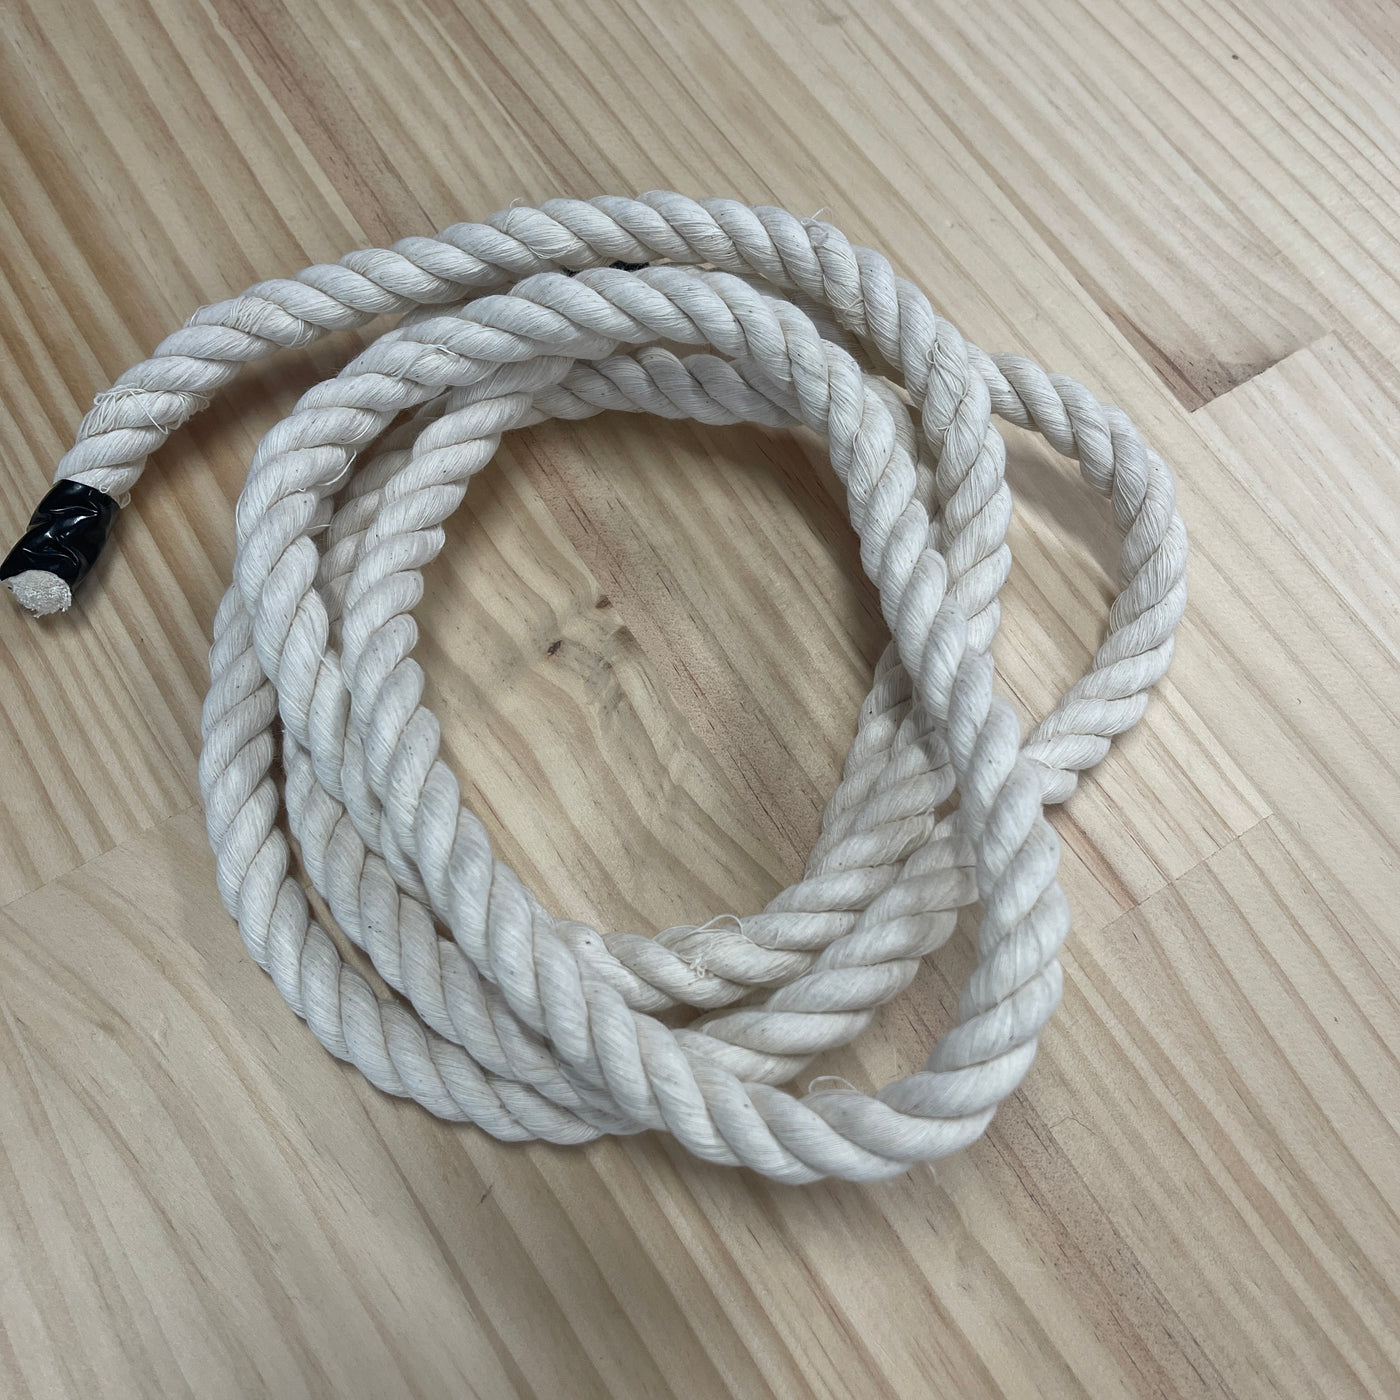 Macrame 3ply 12mm Cotton Rope Natural - Seconds 2m length